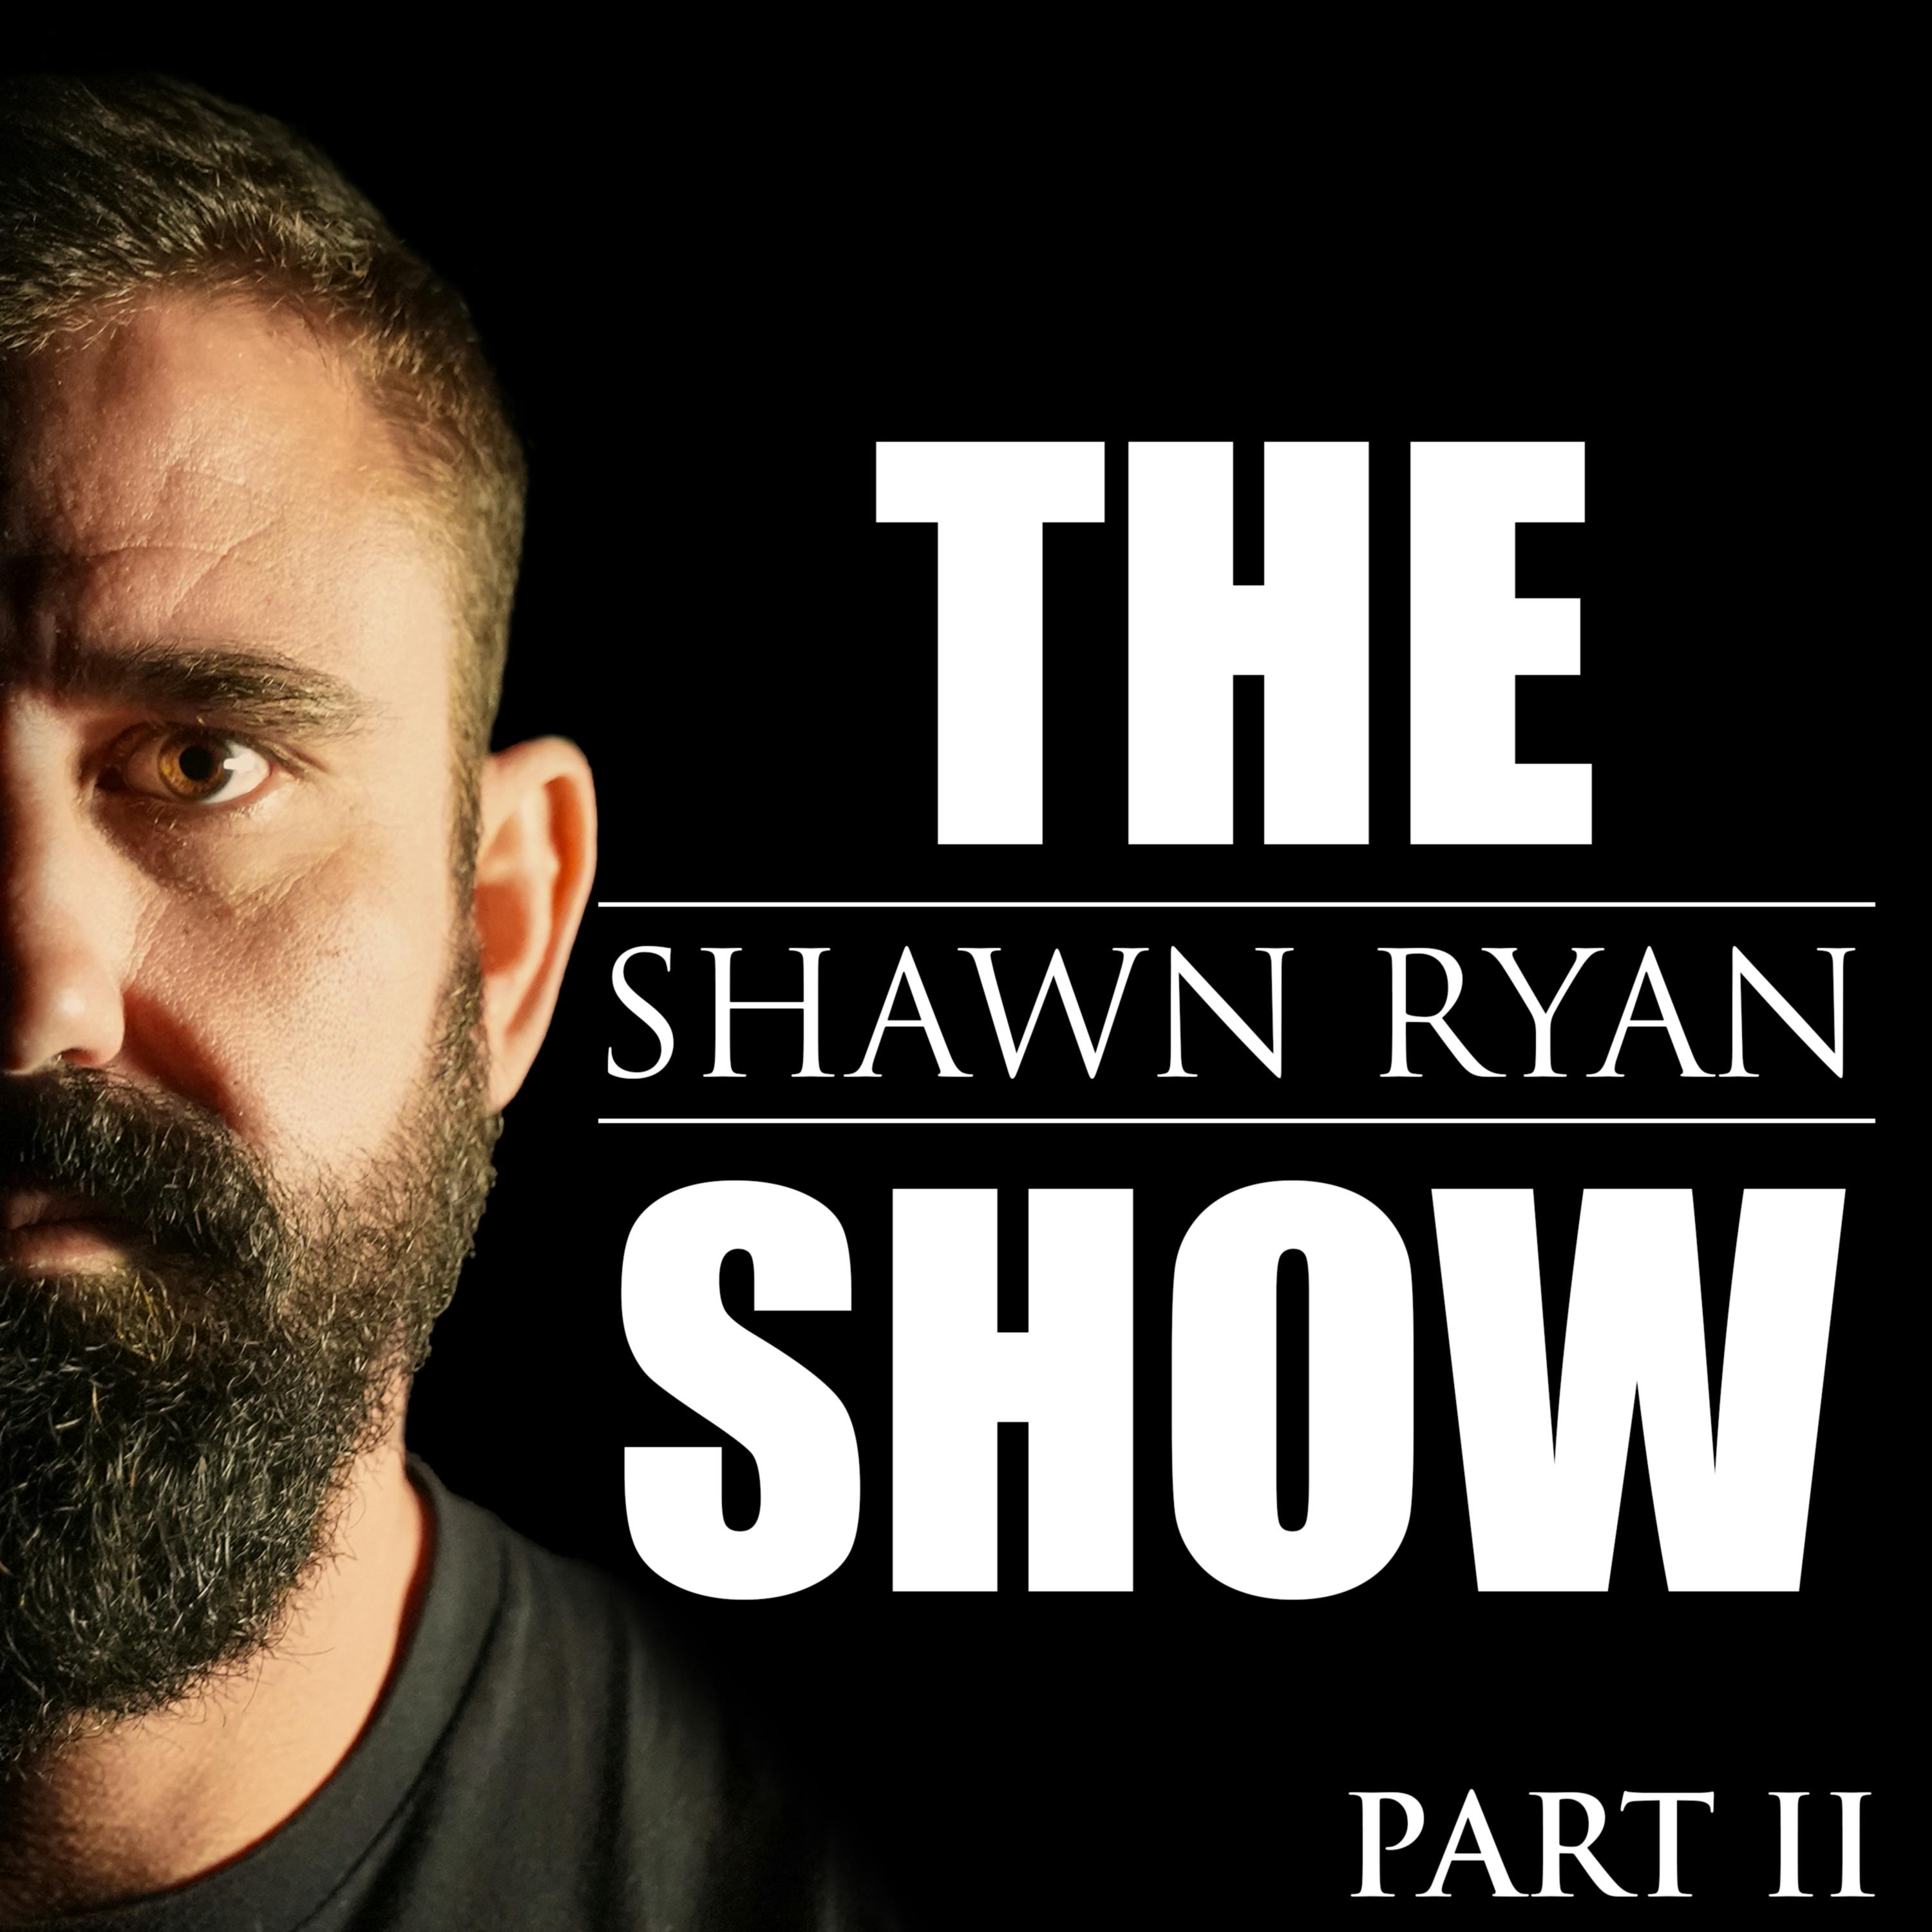 #55 Prime Hall - MARSOC Raider Survives The Unthinkable / Horrific Combat Experience | Part 2 by Shawn Ryan | Cumulus Podcast Network